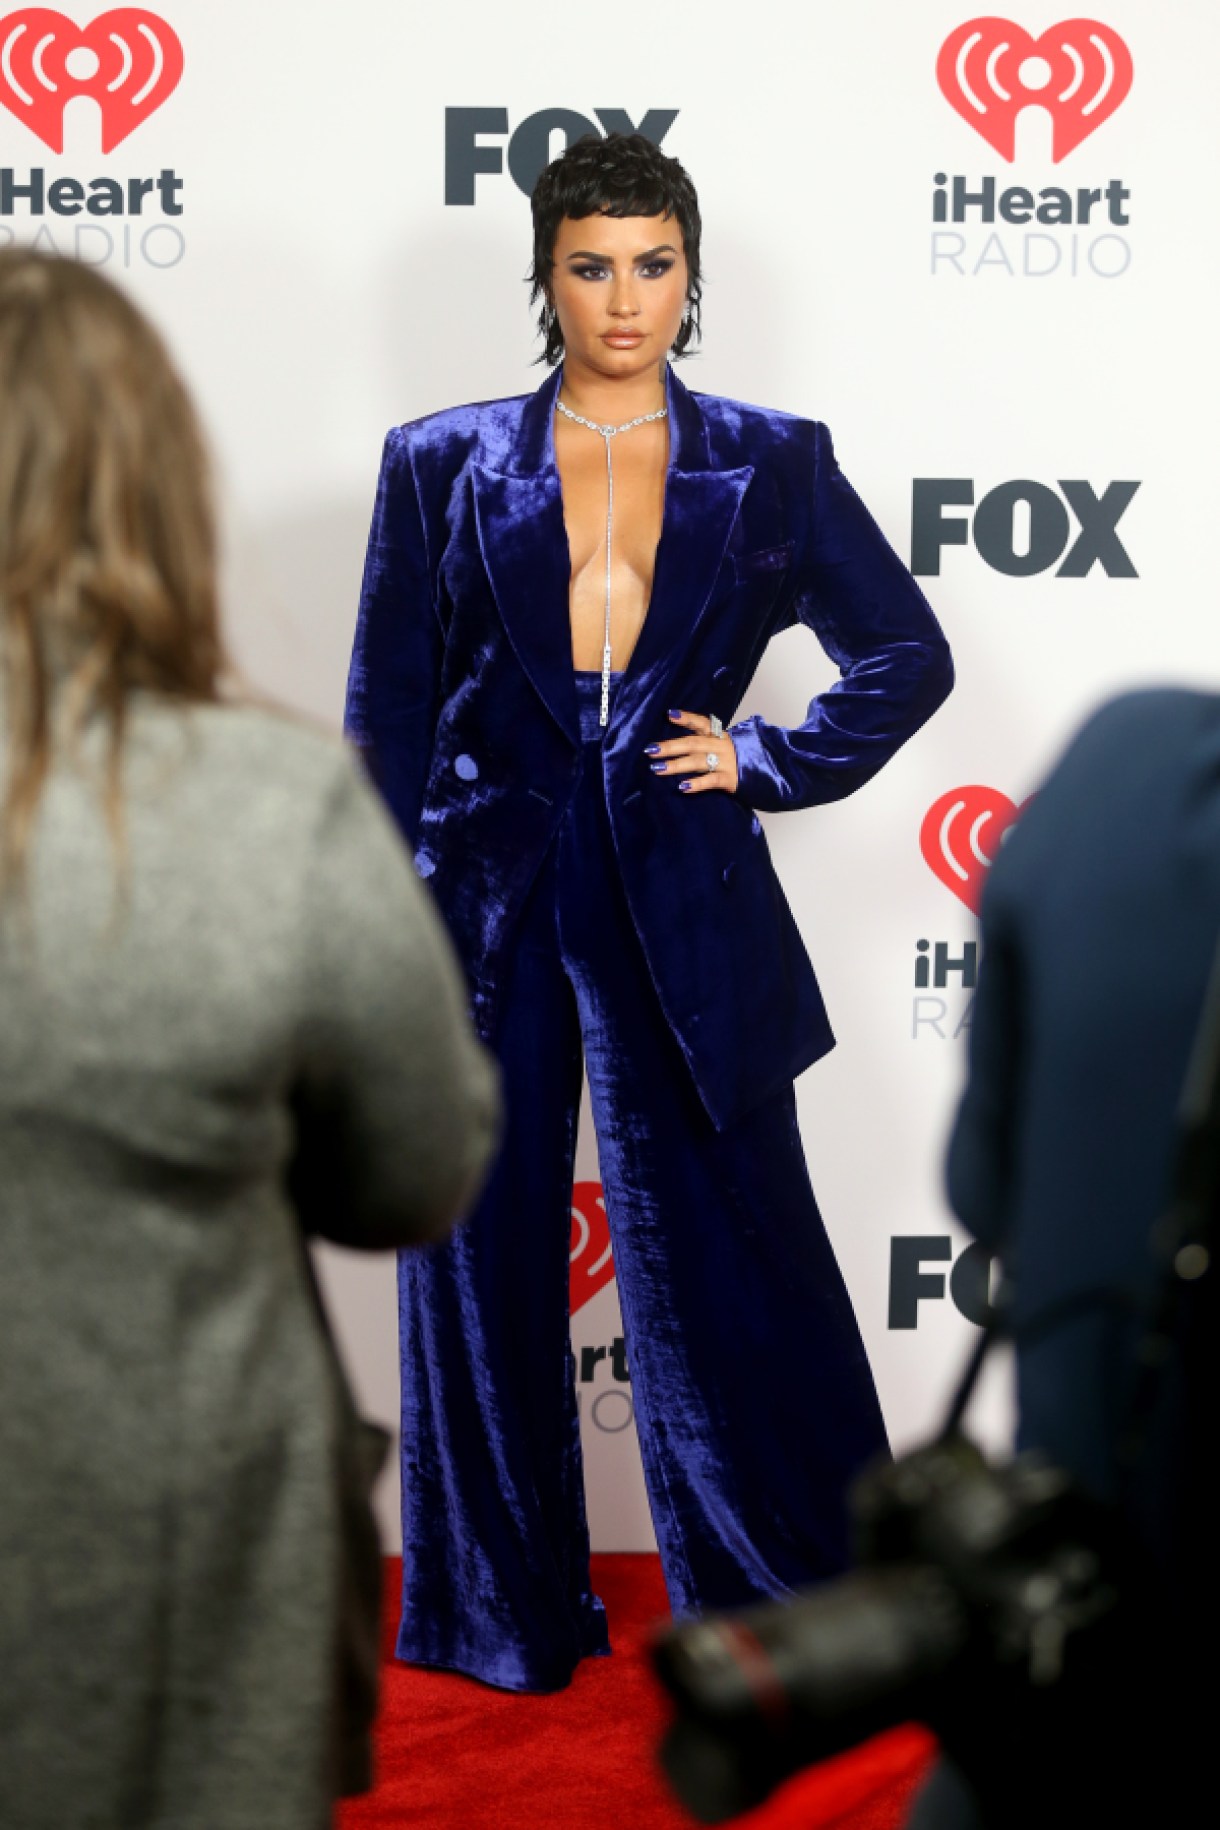 LOS ANGELES, CALIFORNIA - MAY 27: (EDITORIAL USE ONLY) Demi Lovato attends the 2021 iHeartRadio Music Awards at The Dolby Theatre in Los Angeles, California, which was broadcast live on FOX on May 27, 2021. (Photo by Phillip Faraone/Getty Images for iHeartMedia)